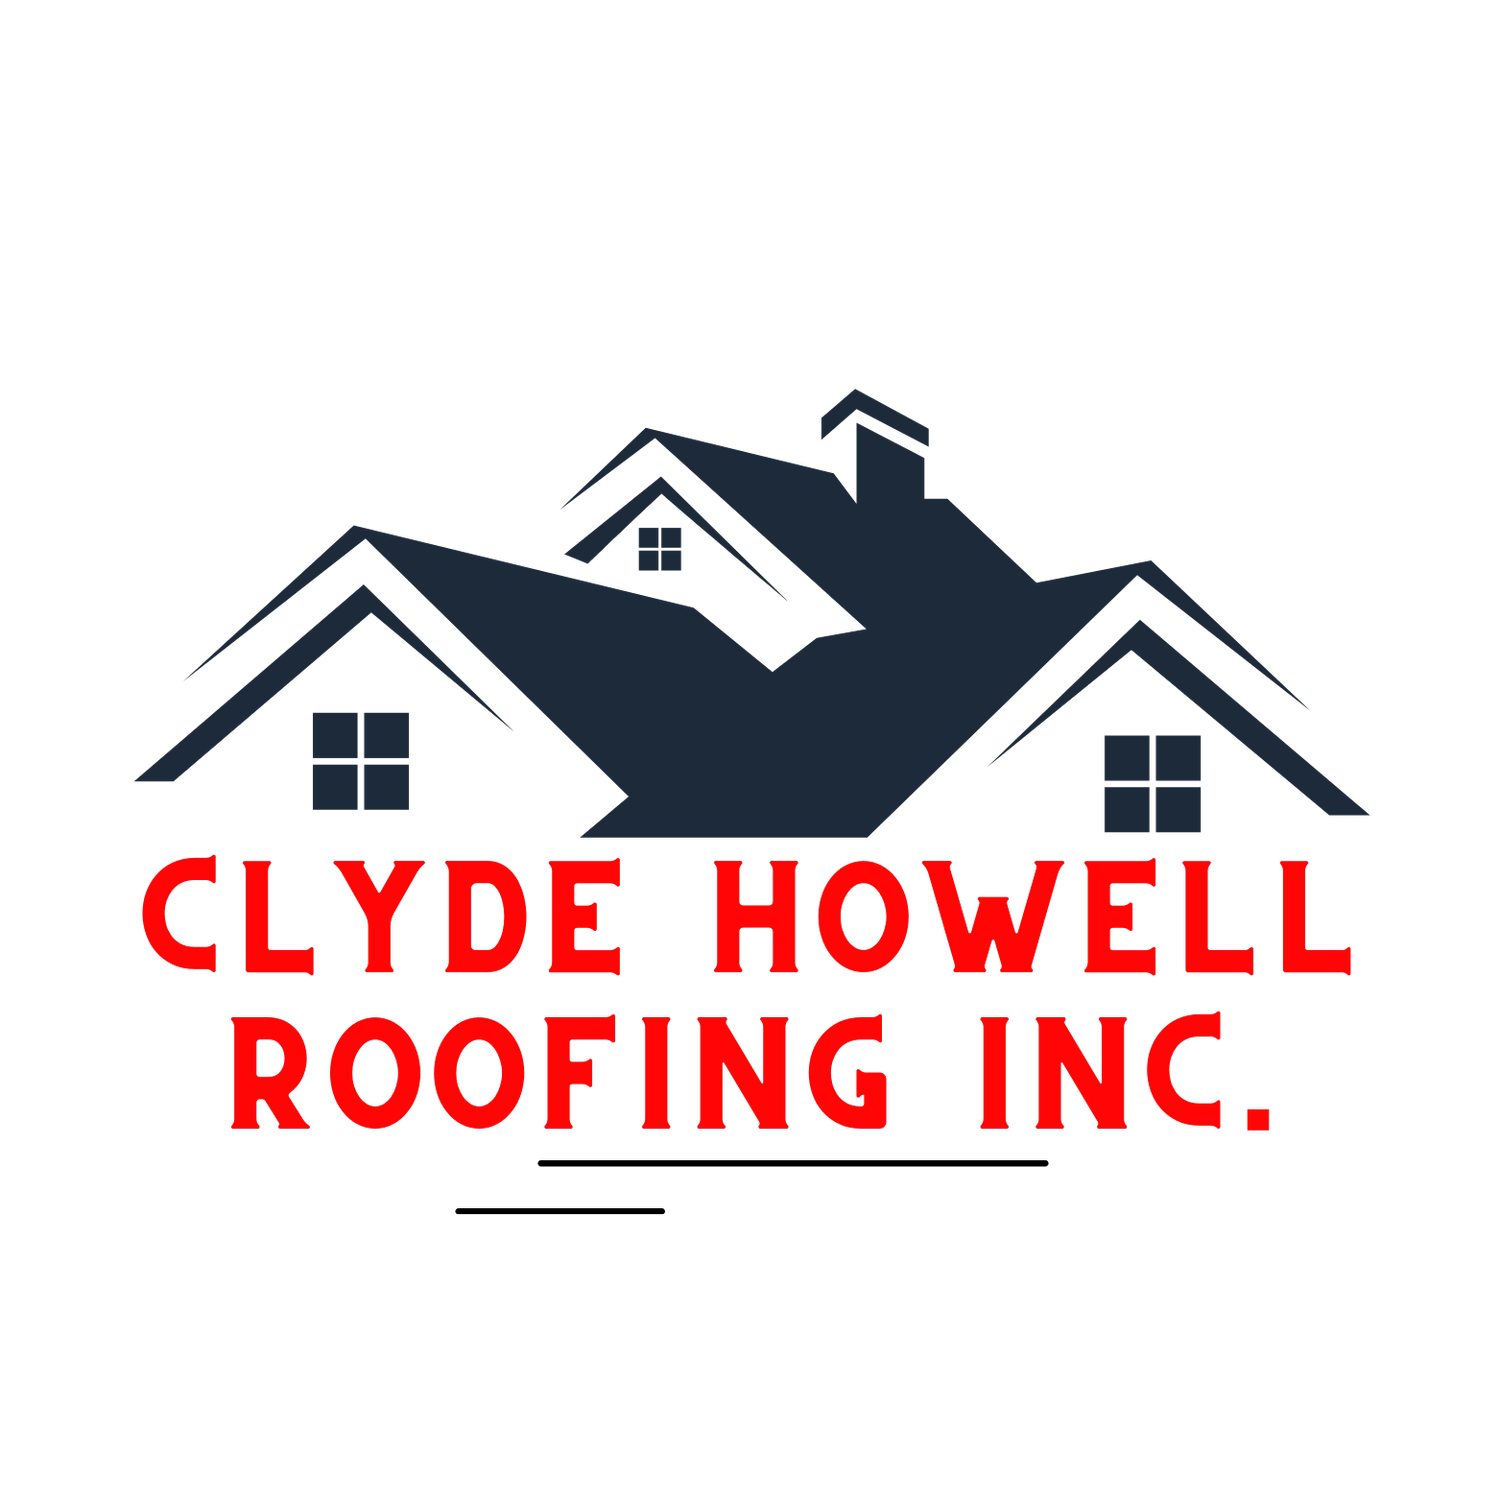 Clyde Howell Roofing Inc.